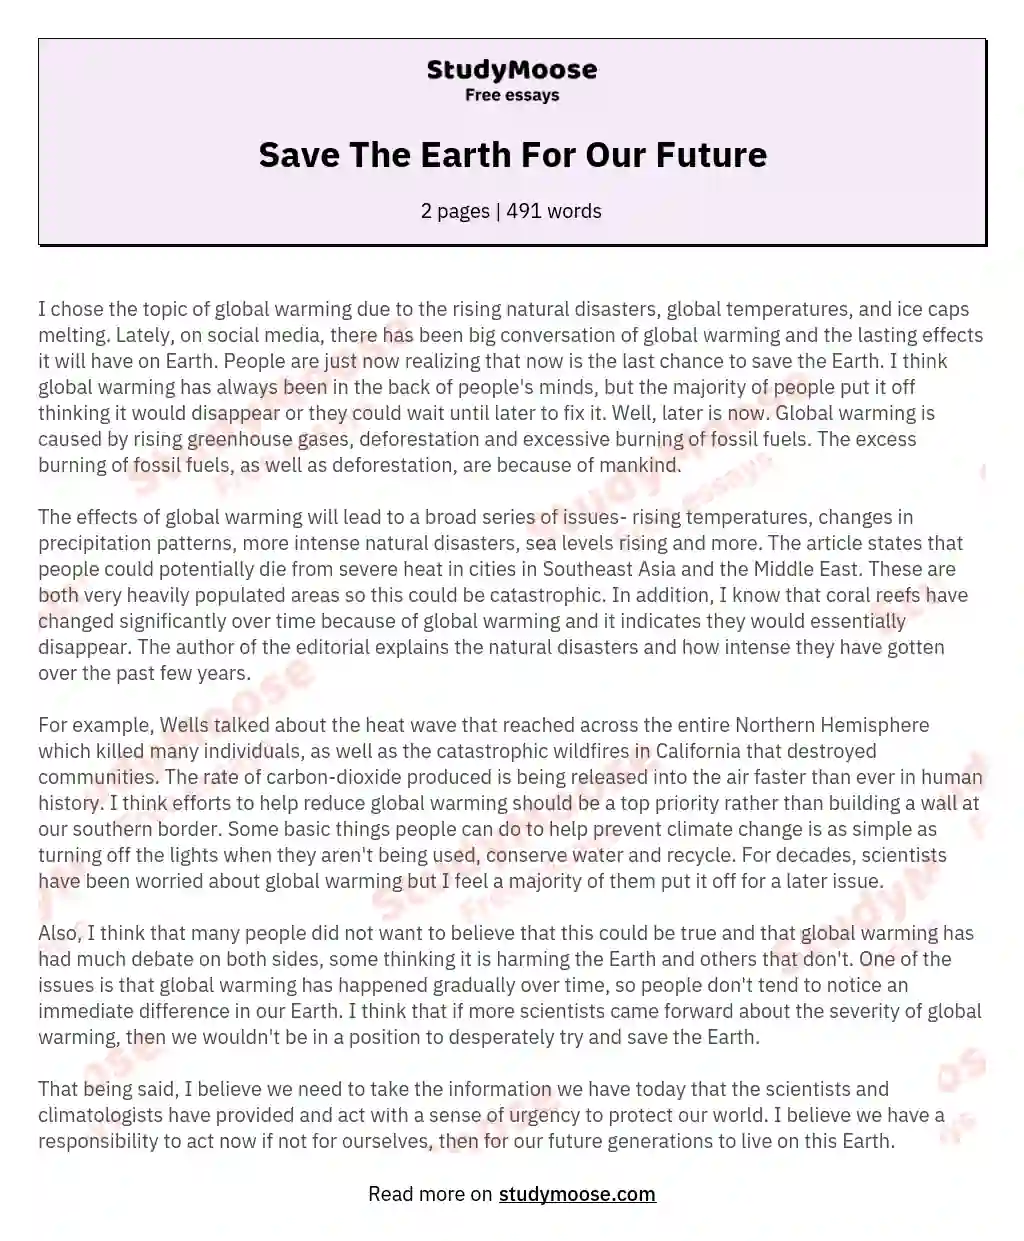 Save The Earth For Our Future essay